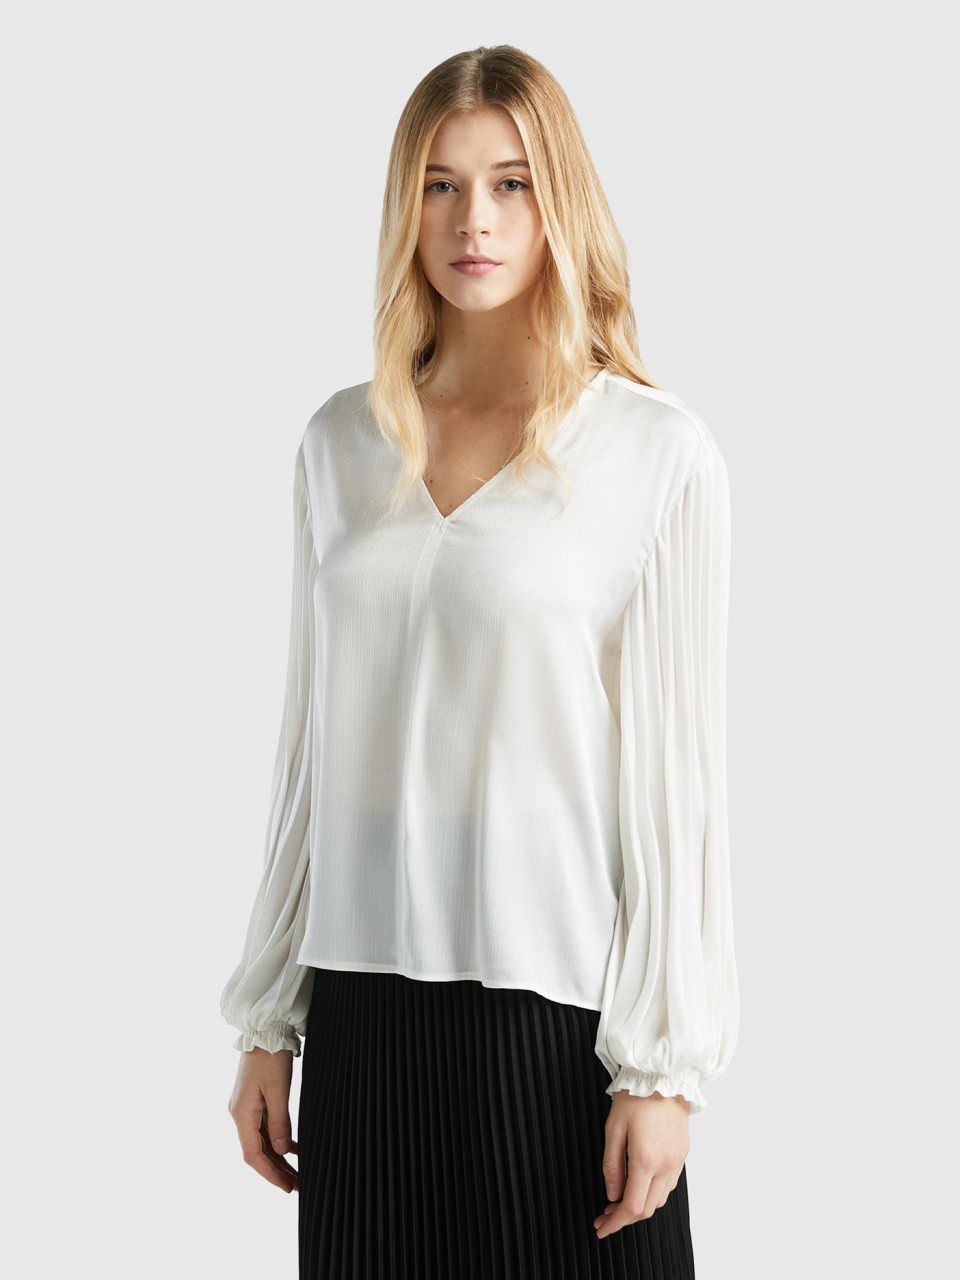 Benetton, Blouse With Long Pleated Sleeves, Creamy White, Women